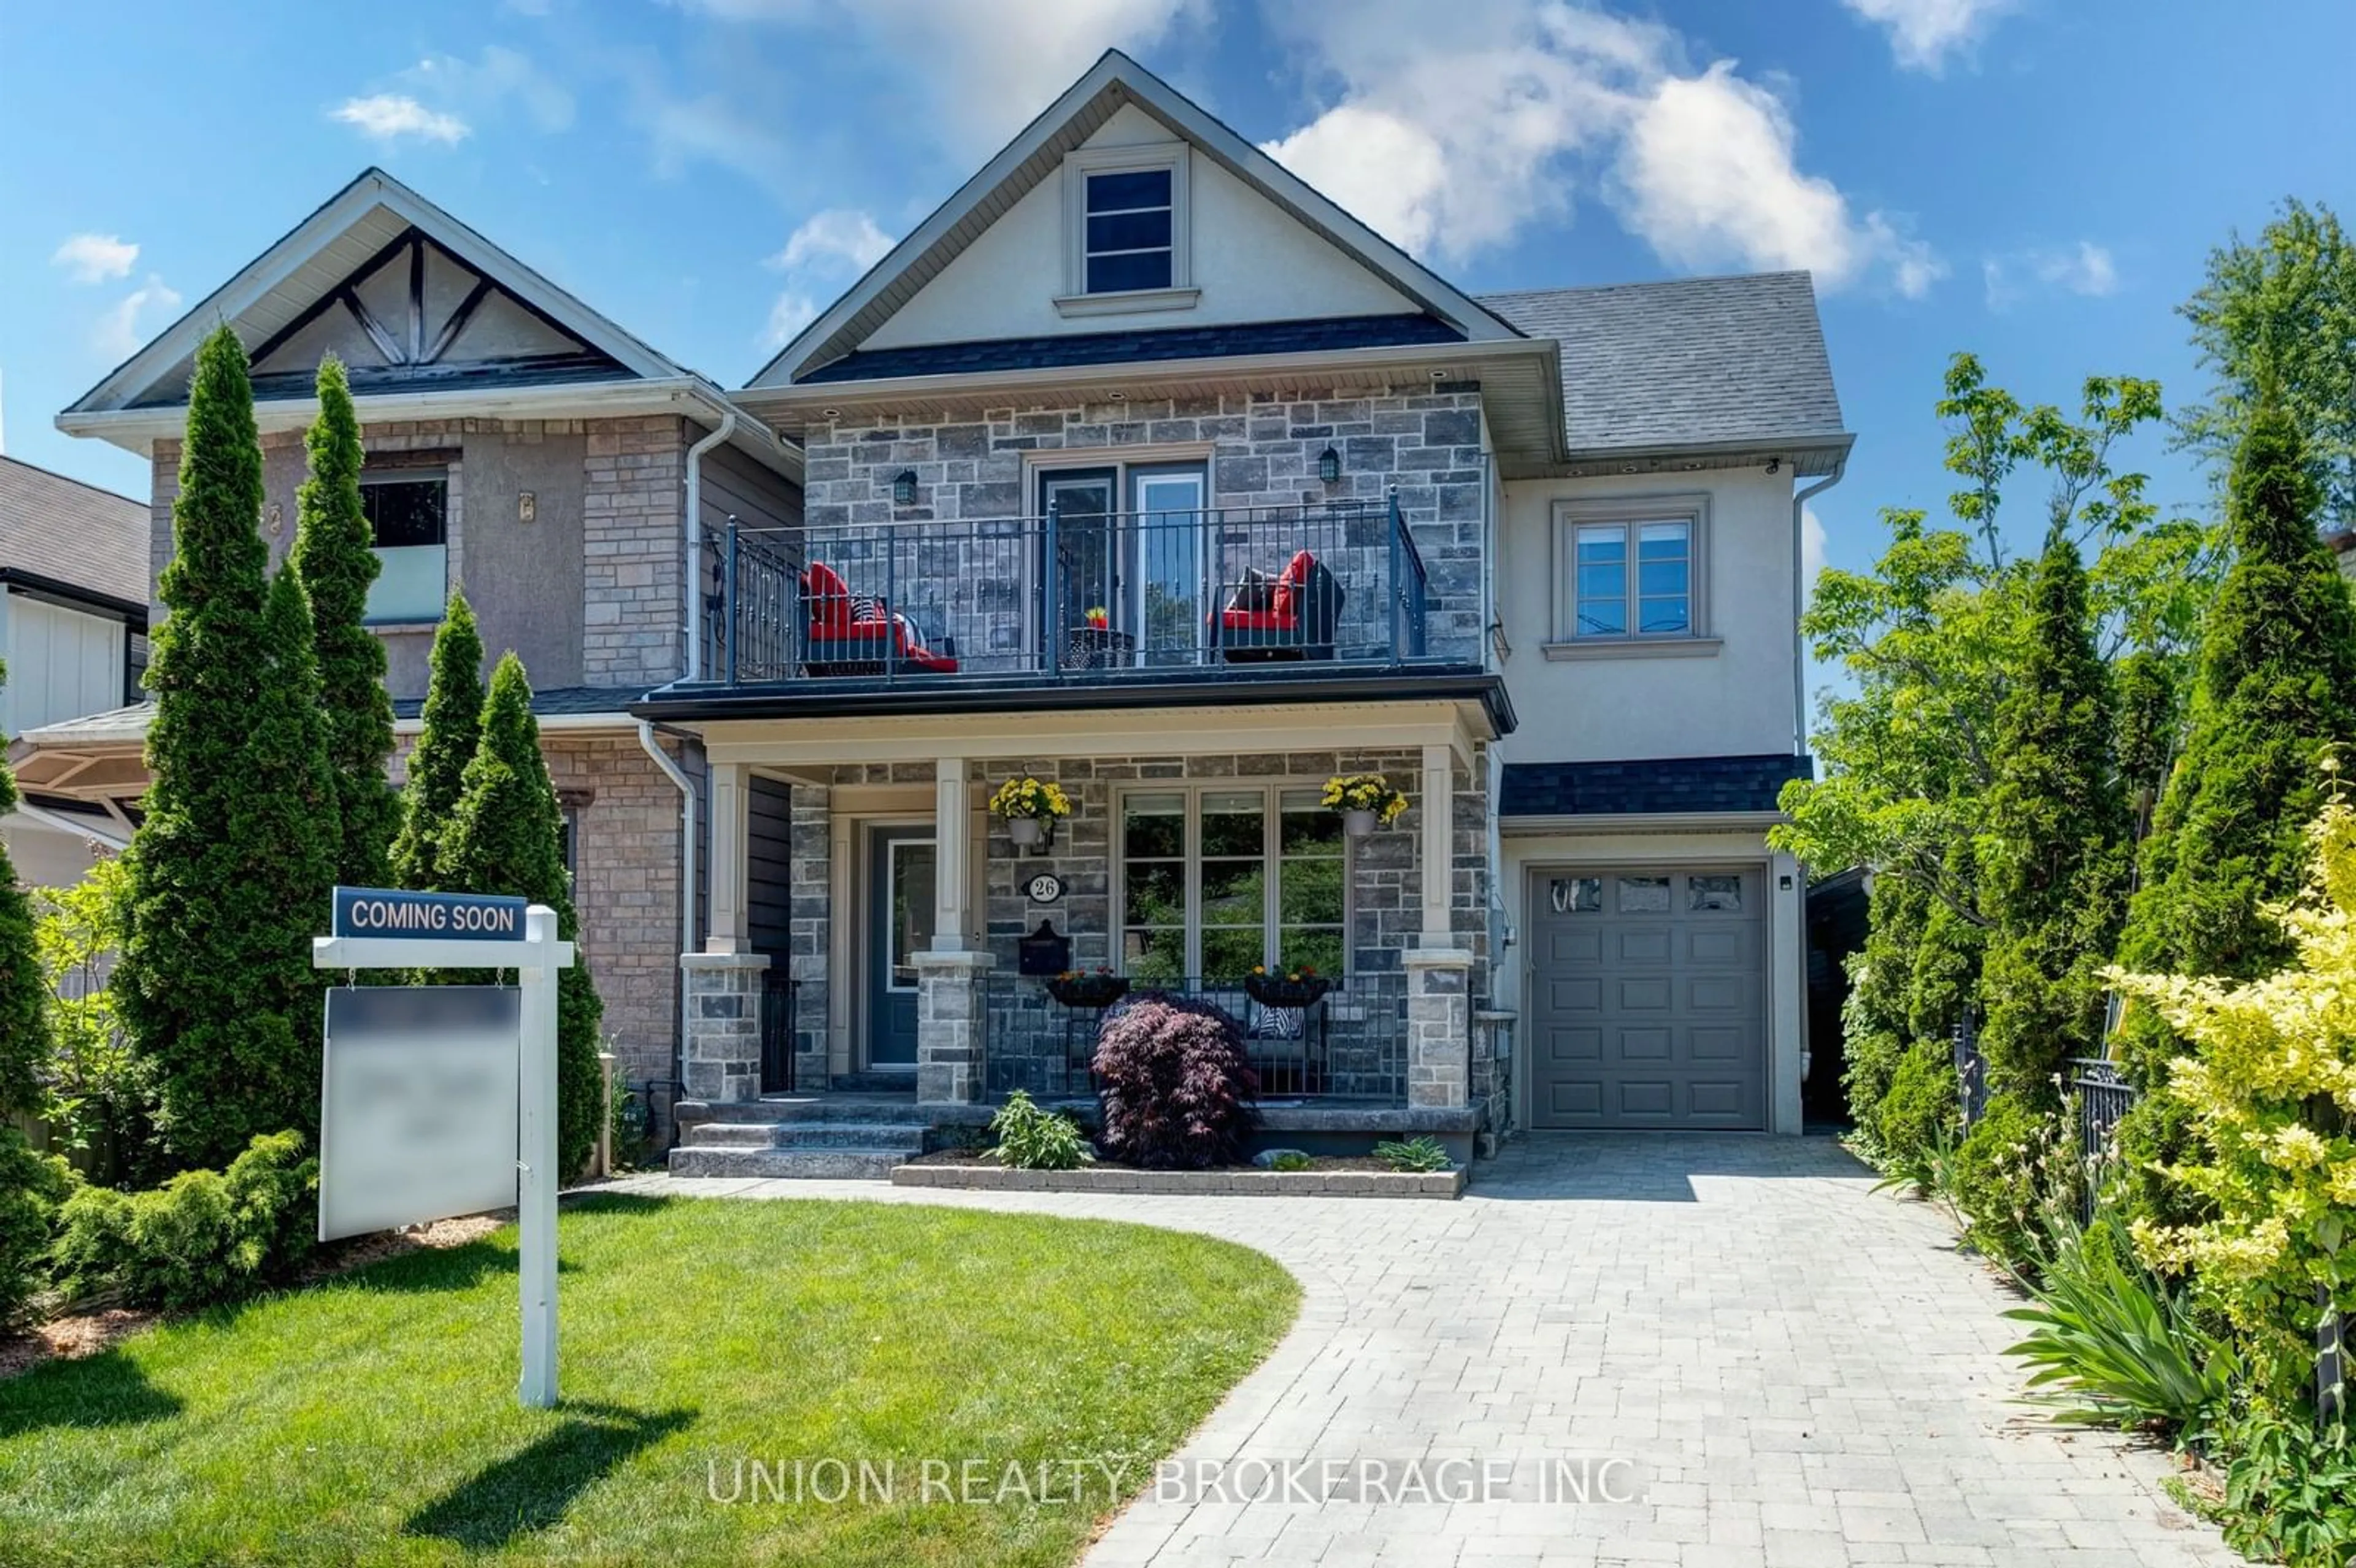 Home with brick exterior material for 26 Birchmount Rd, Toronto Ontario M1N 3J4